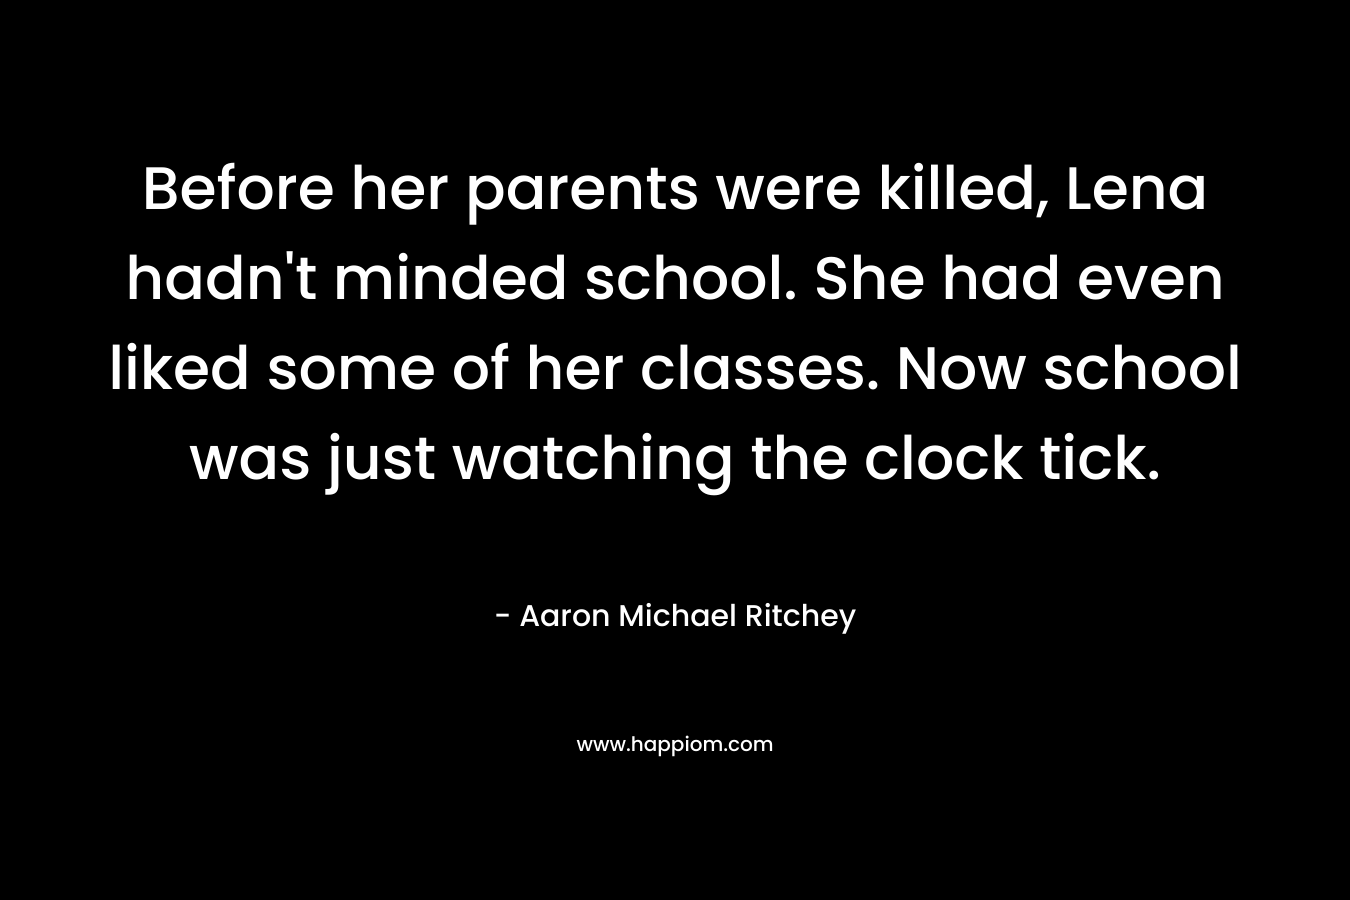 Before her parents were killed, Lena hadn't minded school. She had even liked some of her classes. Now school was just watching the clock tick.